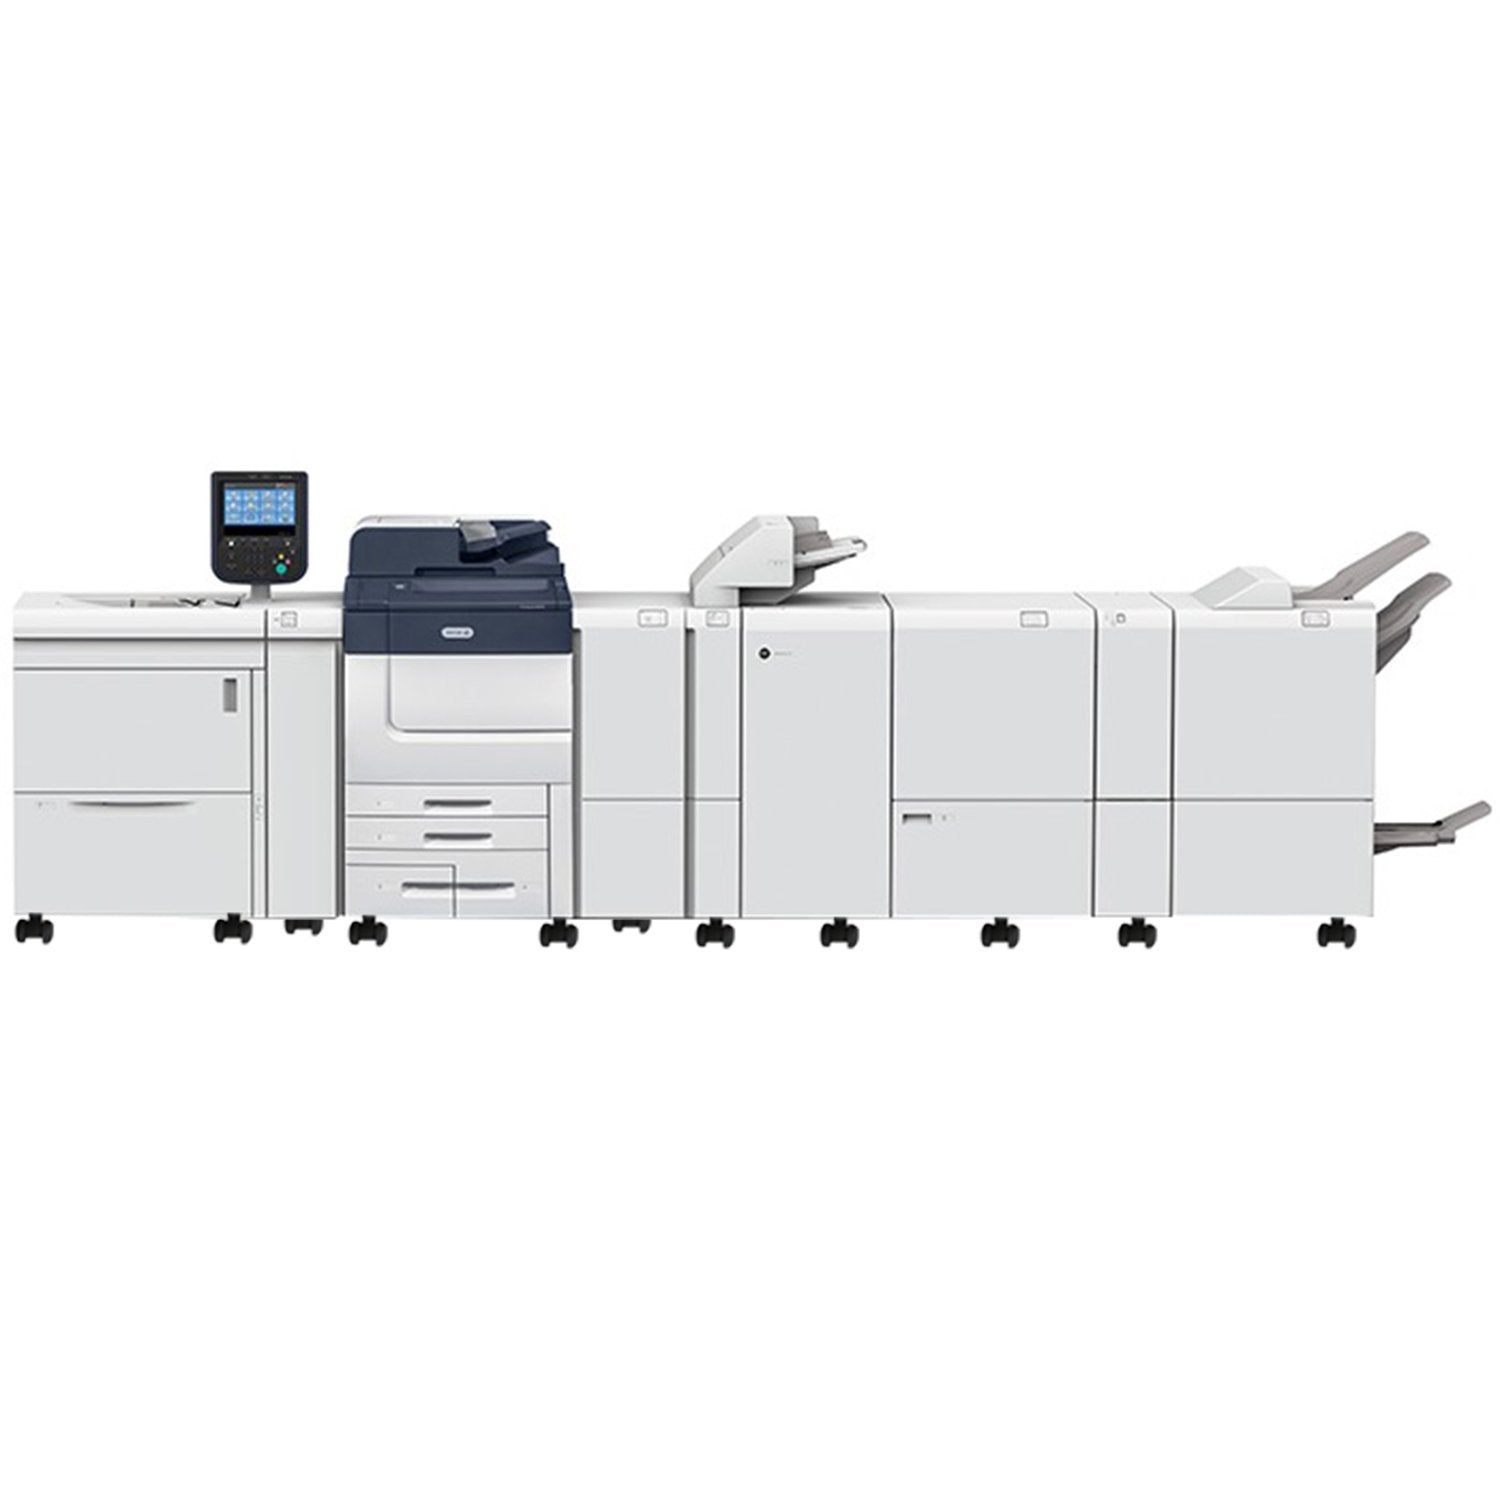 Absolute Toner $299/Month PrimeLink Xerox C9065 Multifunctional Office/Workgroup Color Laser Production Printer - VERY LOW COUNT Printers/Copiers